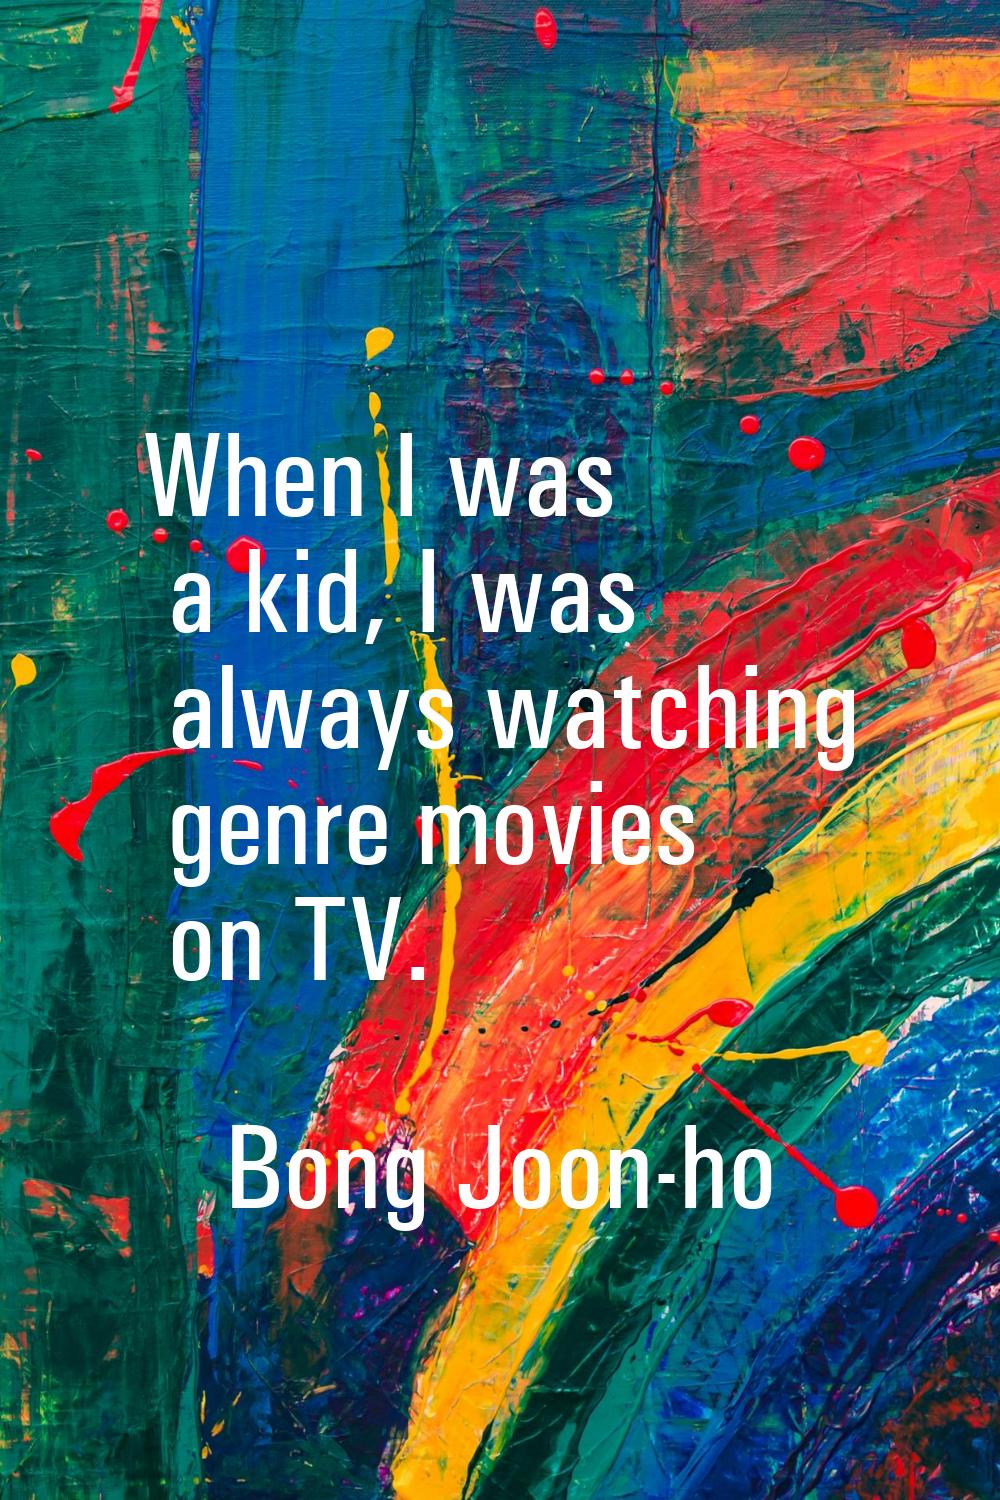 When I was a kid, I was always watching genre movies on TV.